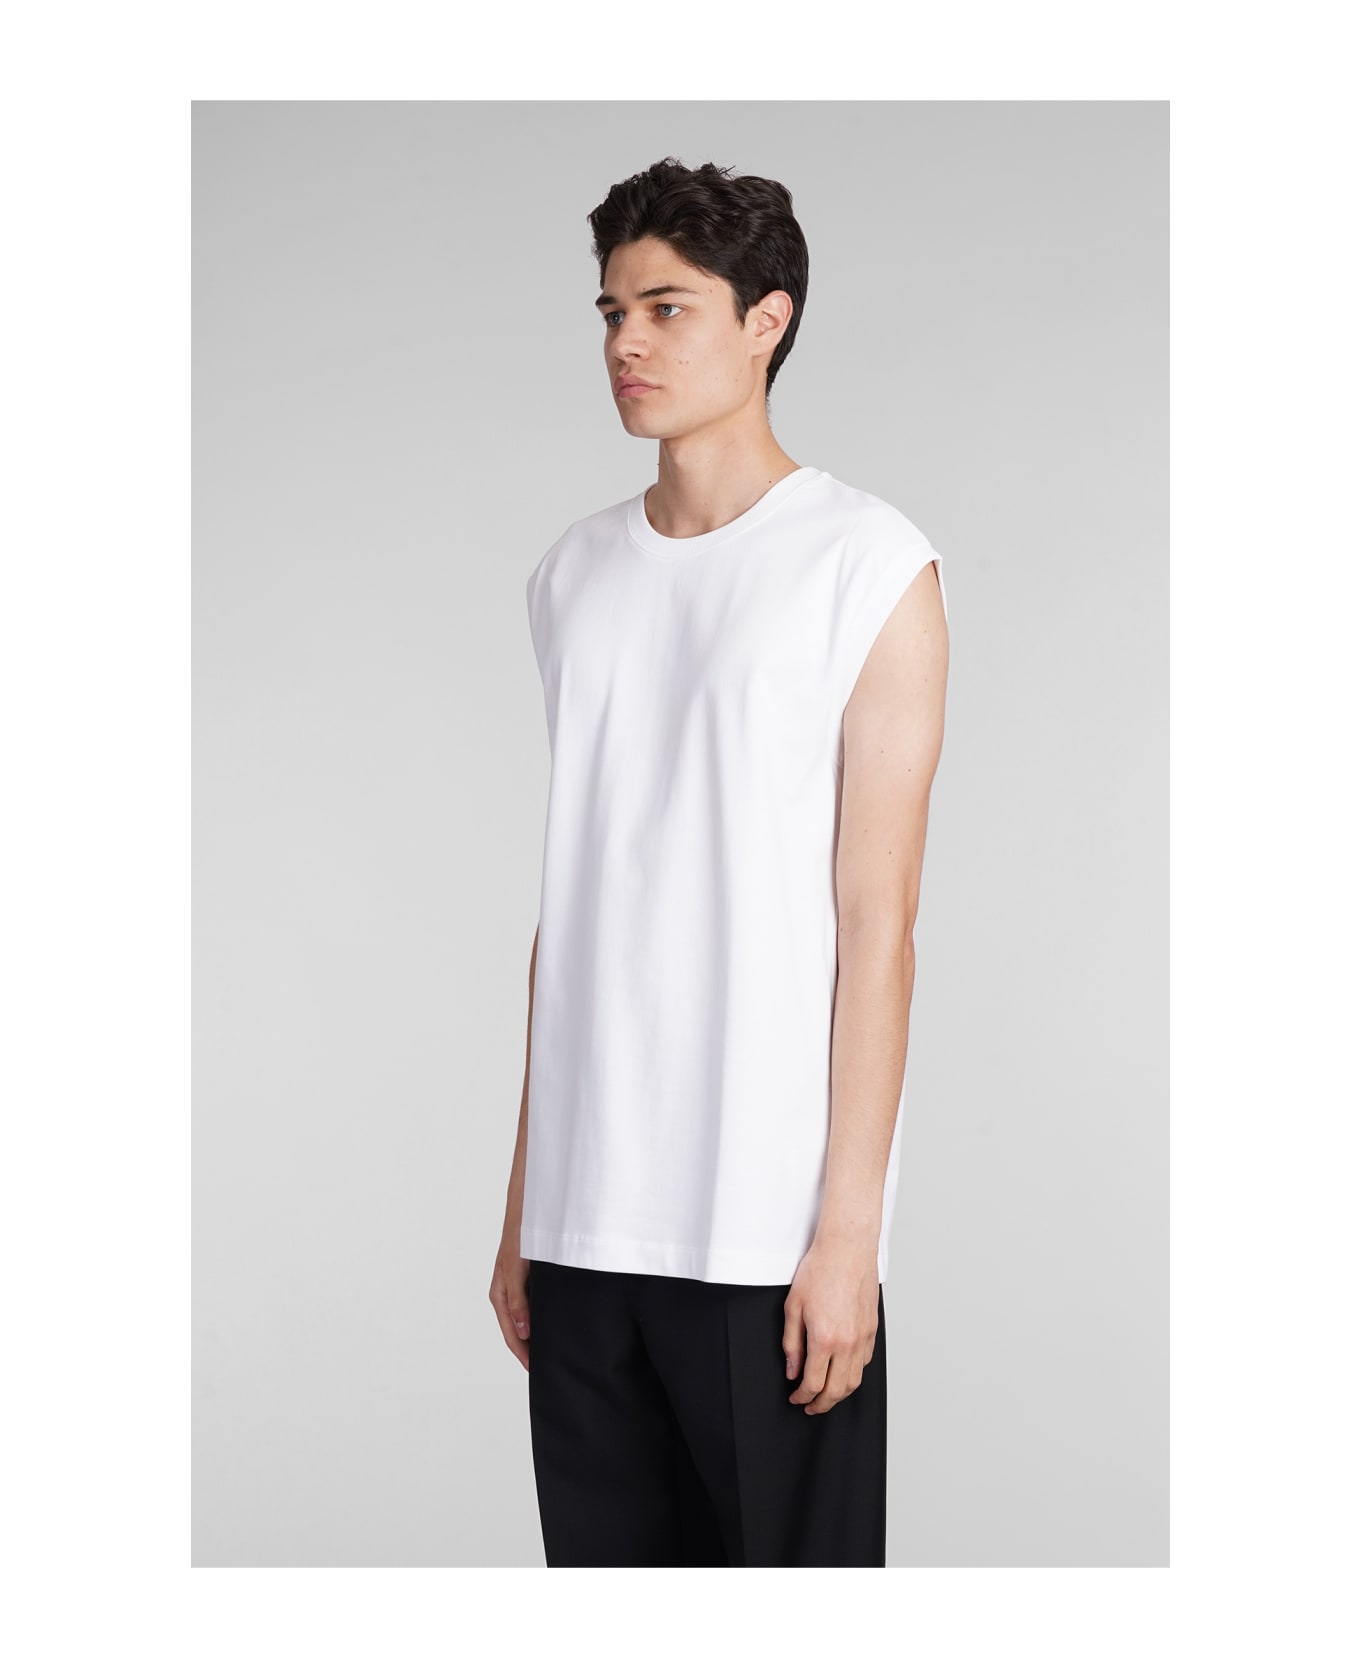 Helmut Lang Tank Top In White Cotton - white シャツ